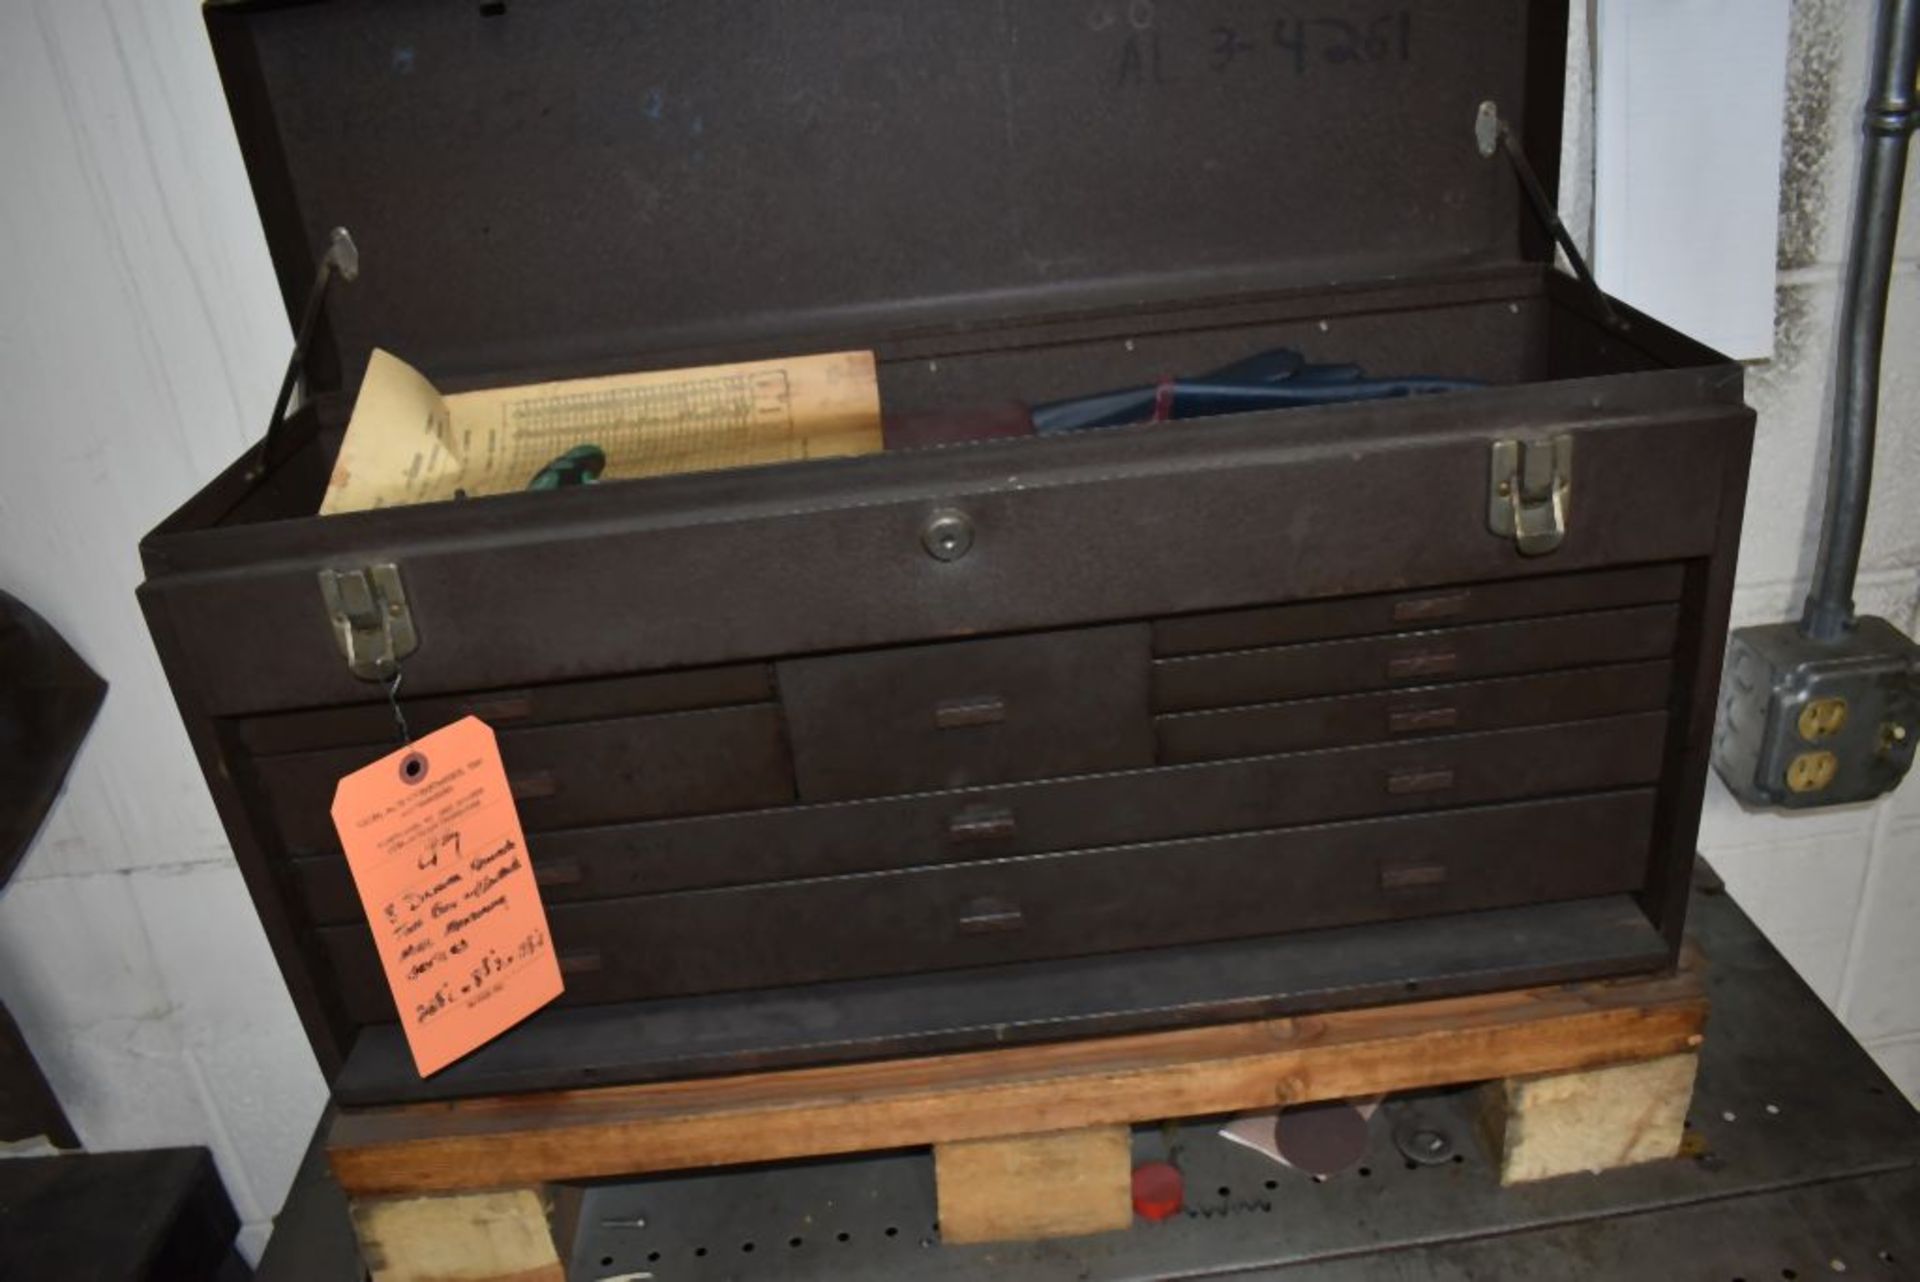 EIGHT DRAWER KENNEDY TOOL BOX WITH CONTENTS, MISC. MEASURING DEVICES, 26 1/2"L x 8 1/2"D x 13 1/2"H